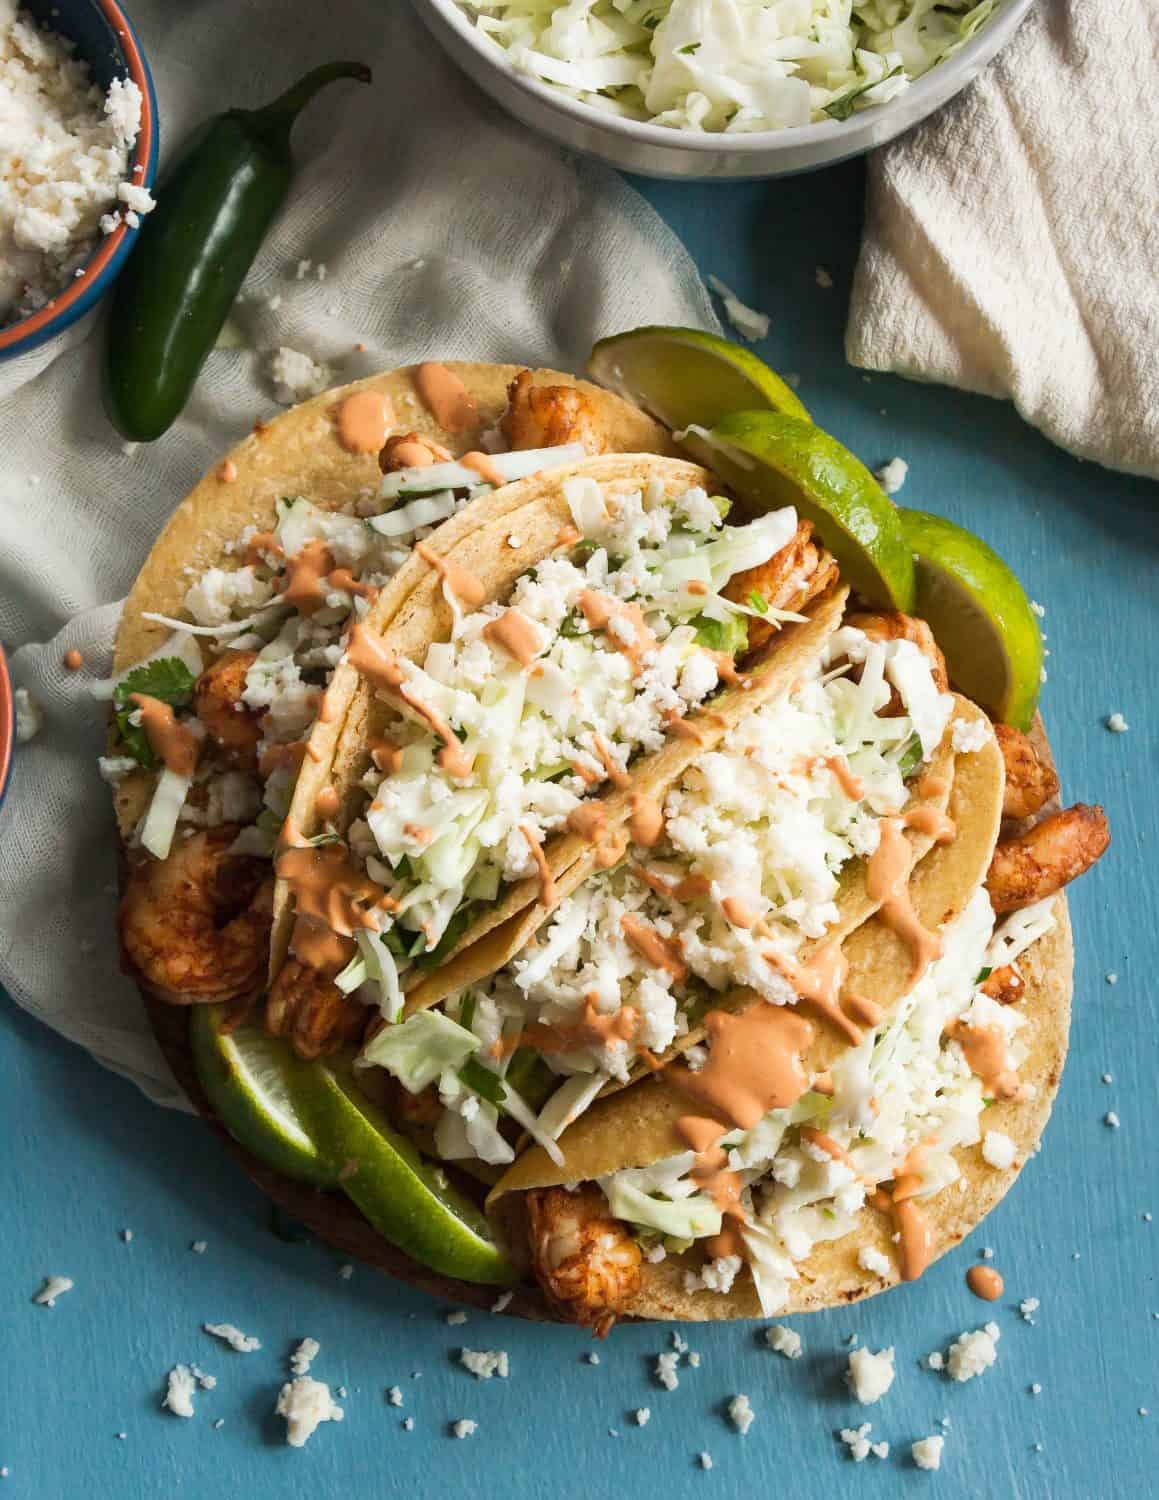 Whether you make them indoors on a grill pan or fire up the outdoor grill, these grilled shrimp tacos put you in a beach state of mind no matter the weather. * Recipe on GoodieGodmother.com